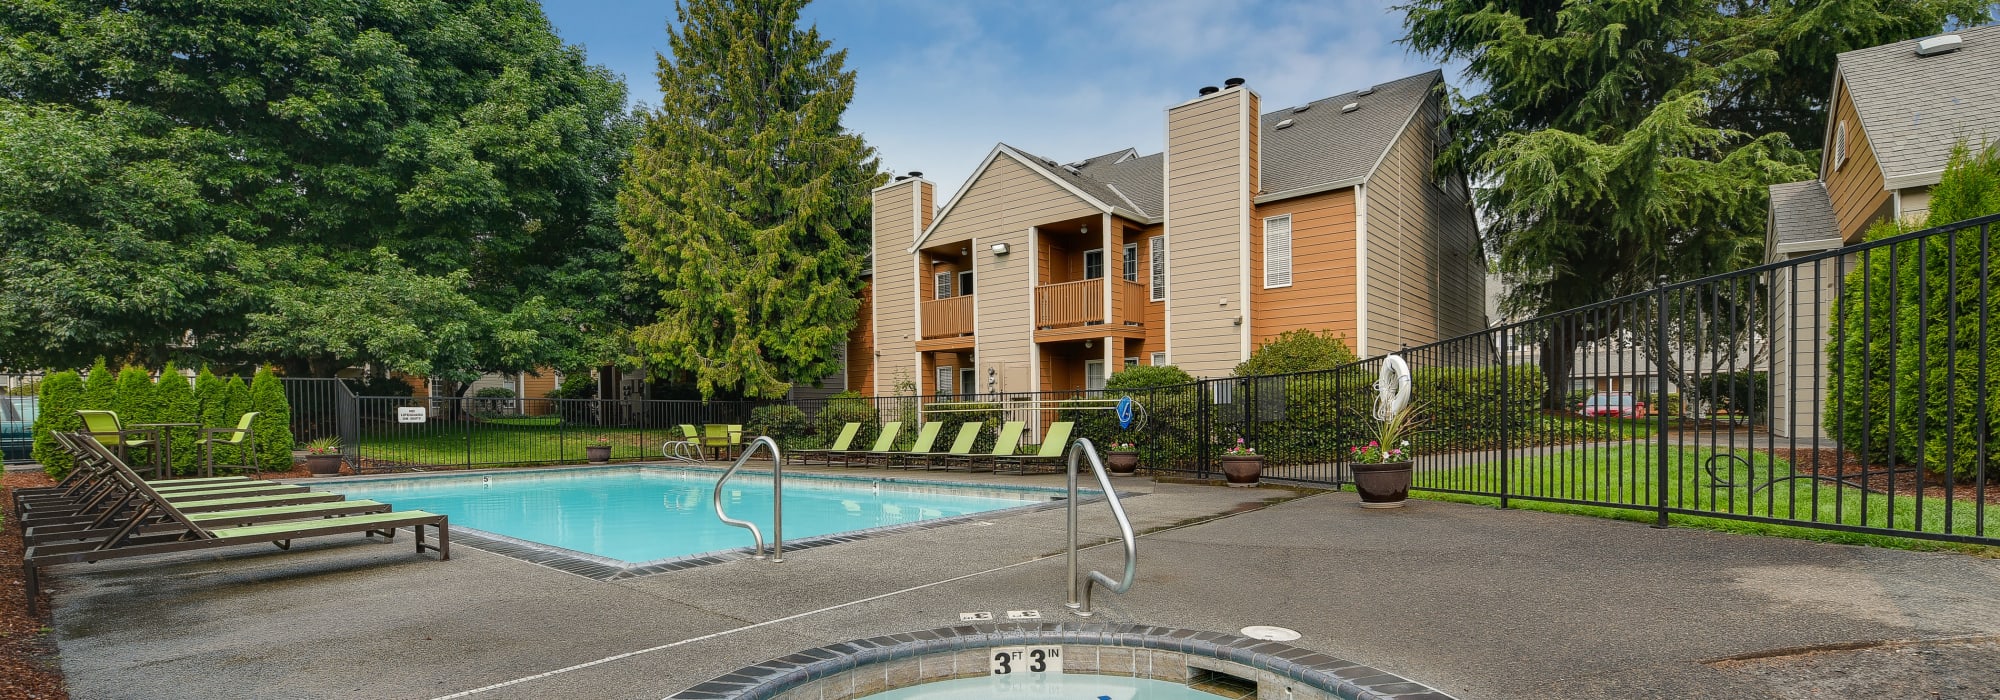 Contact us at Carriage House Apartments in Vancouver, Washington